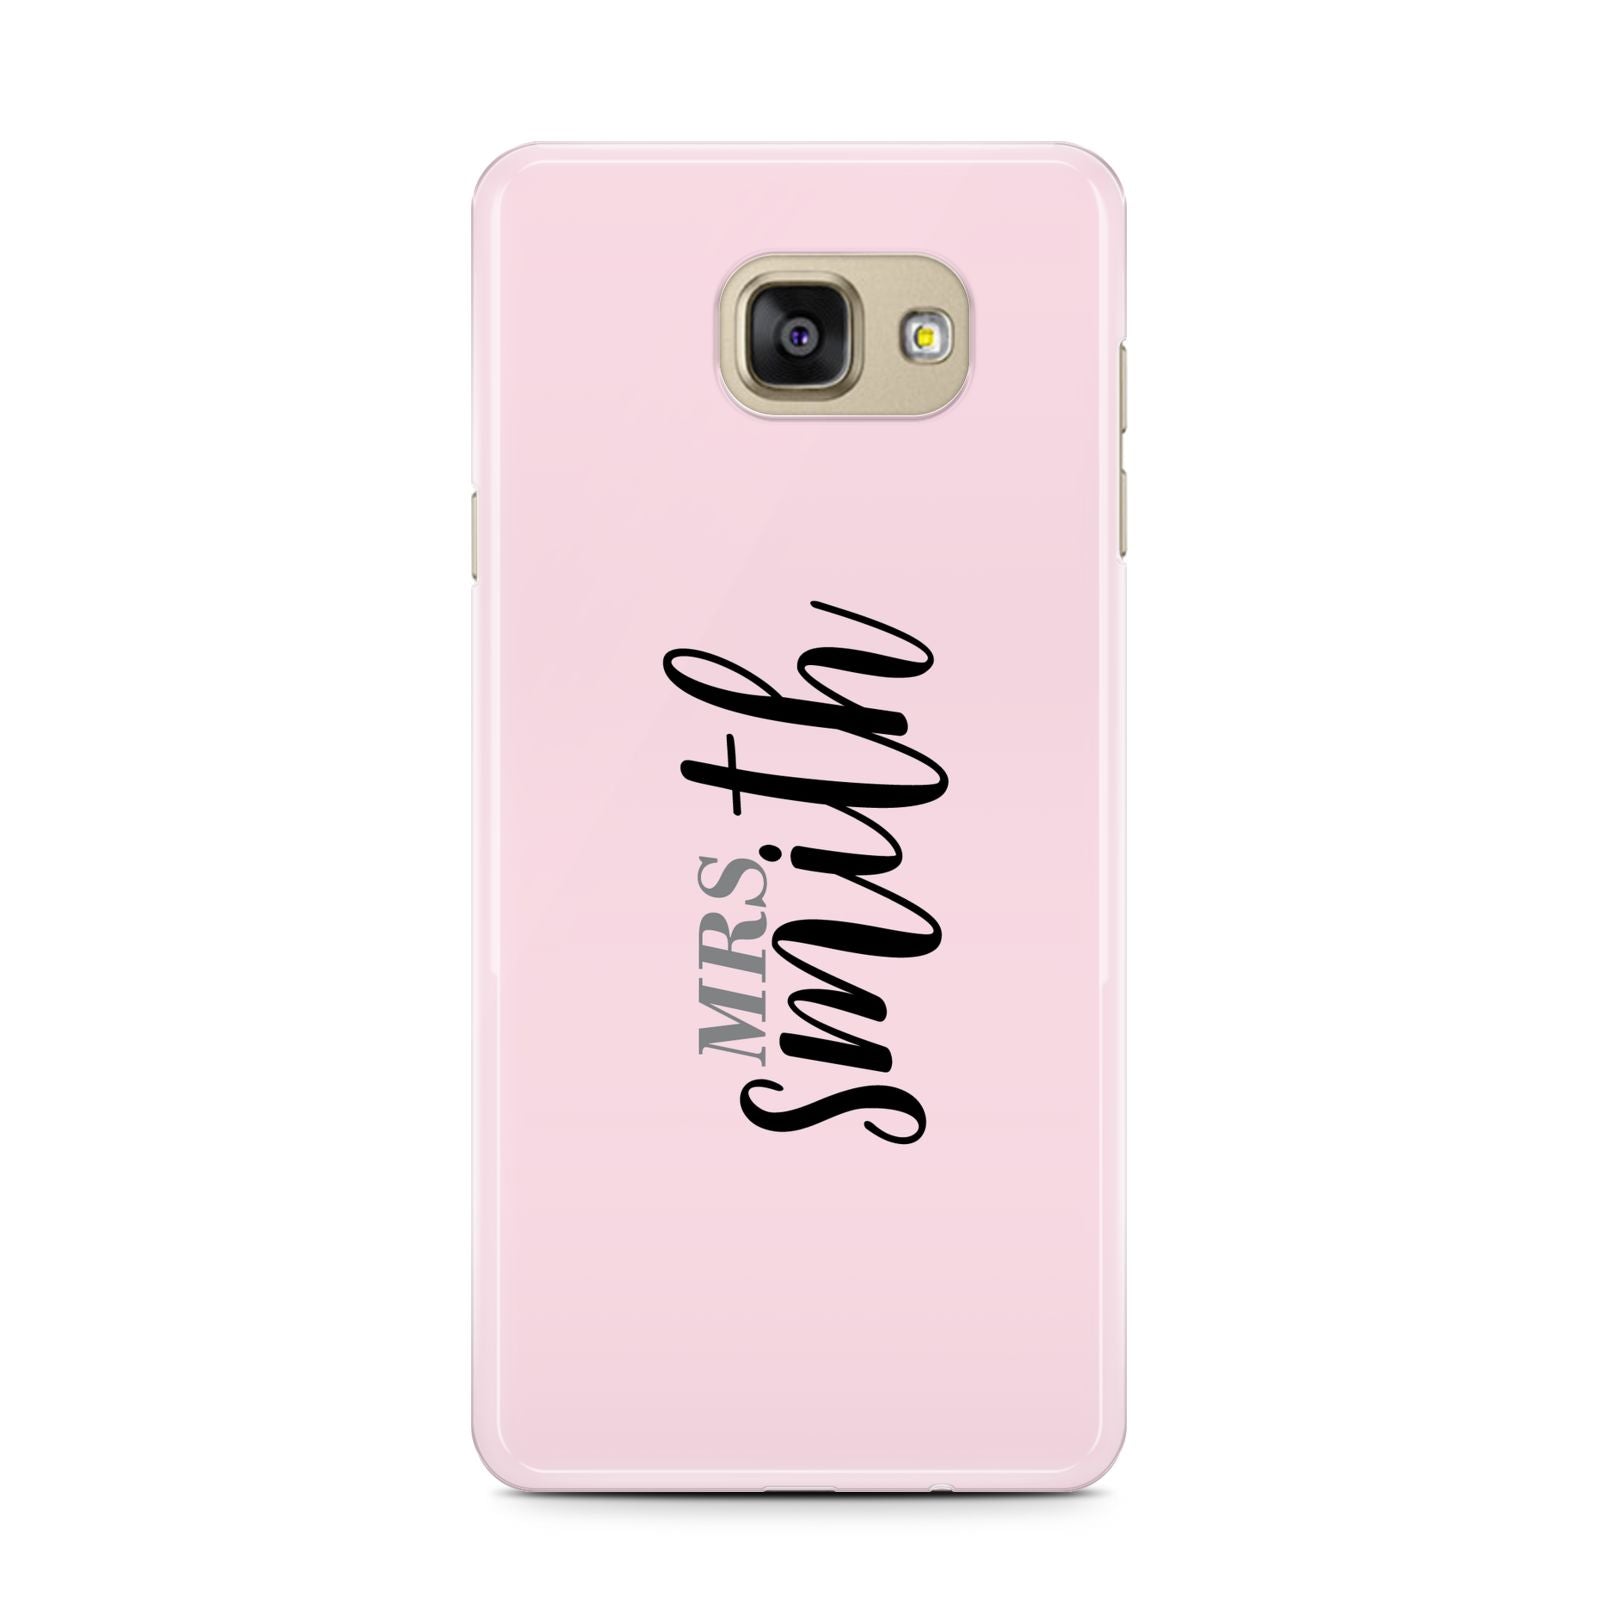 Personalised Bridal Samsung Galaxy A7 2016 Case on gold phone